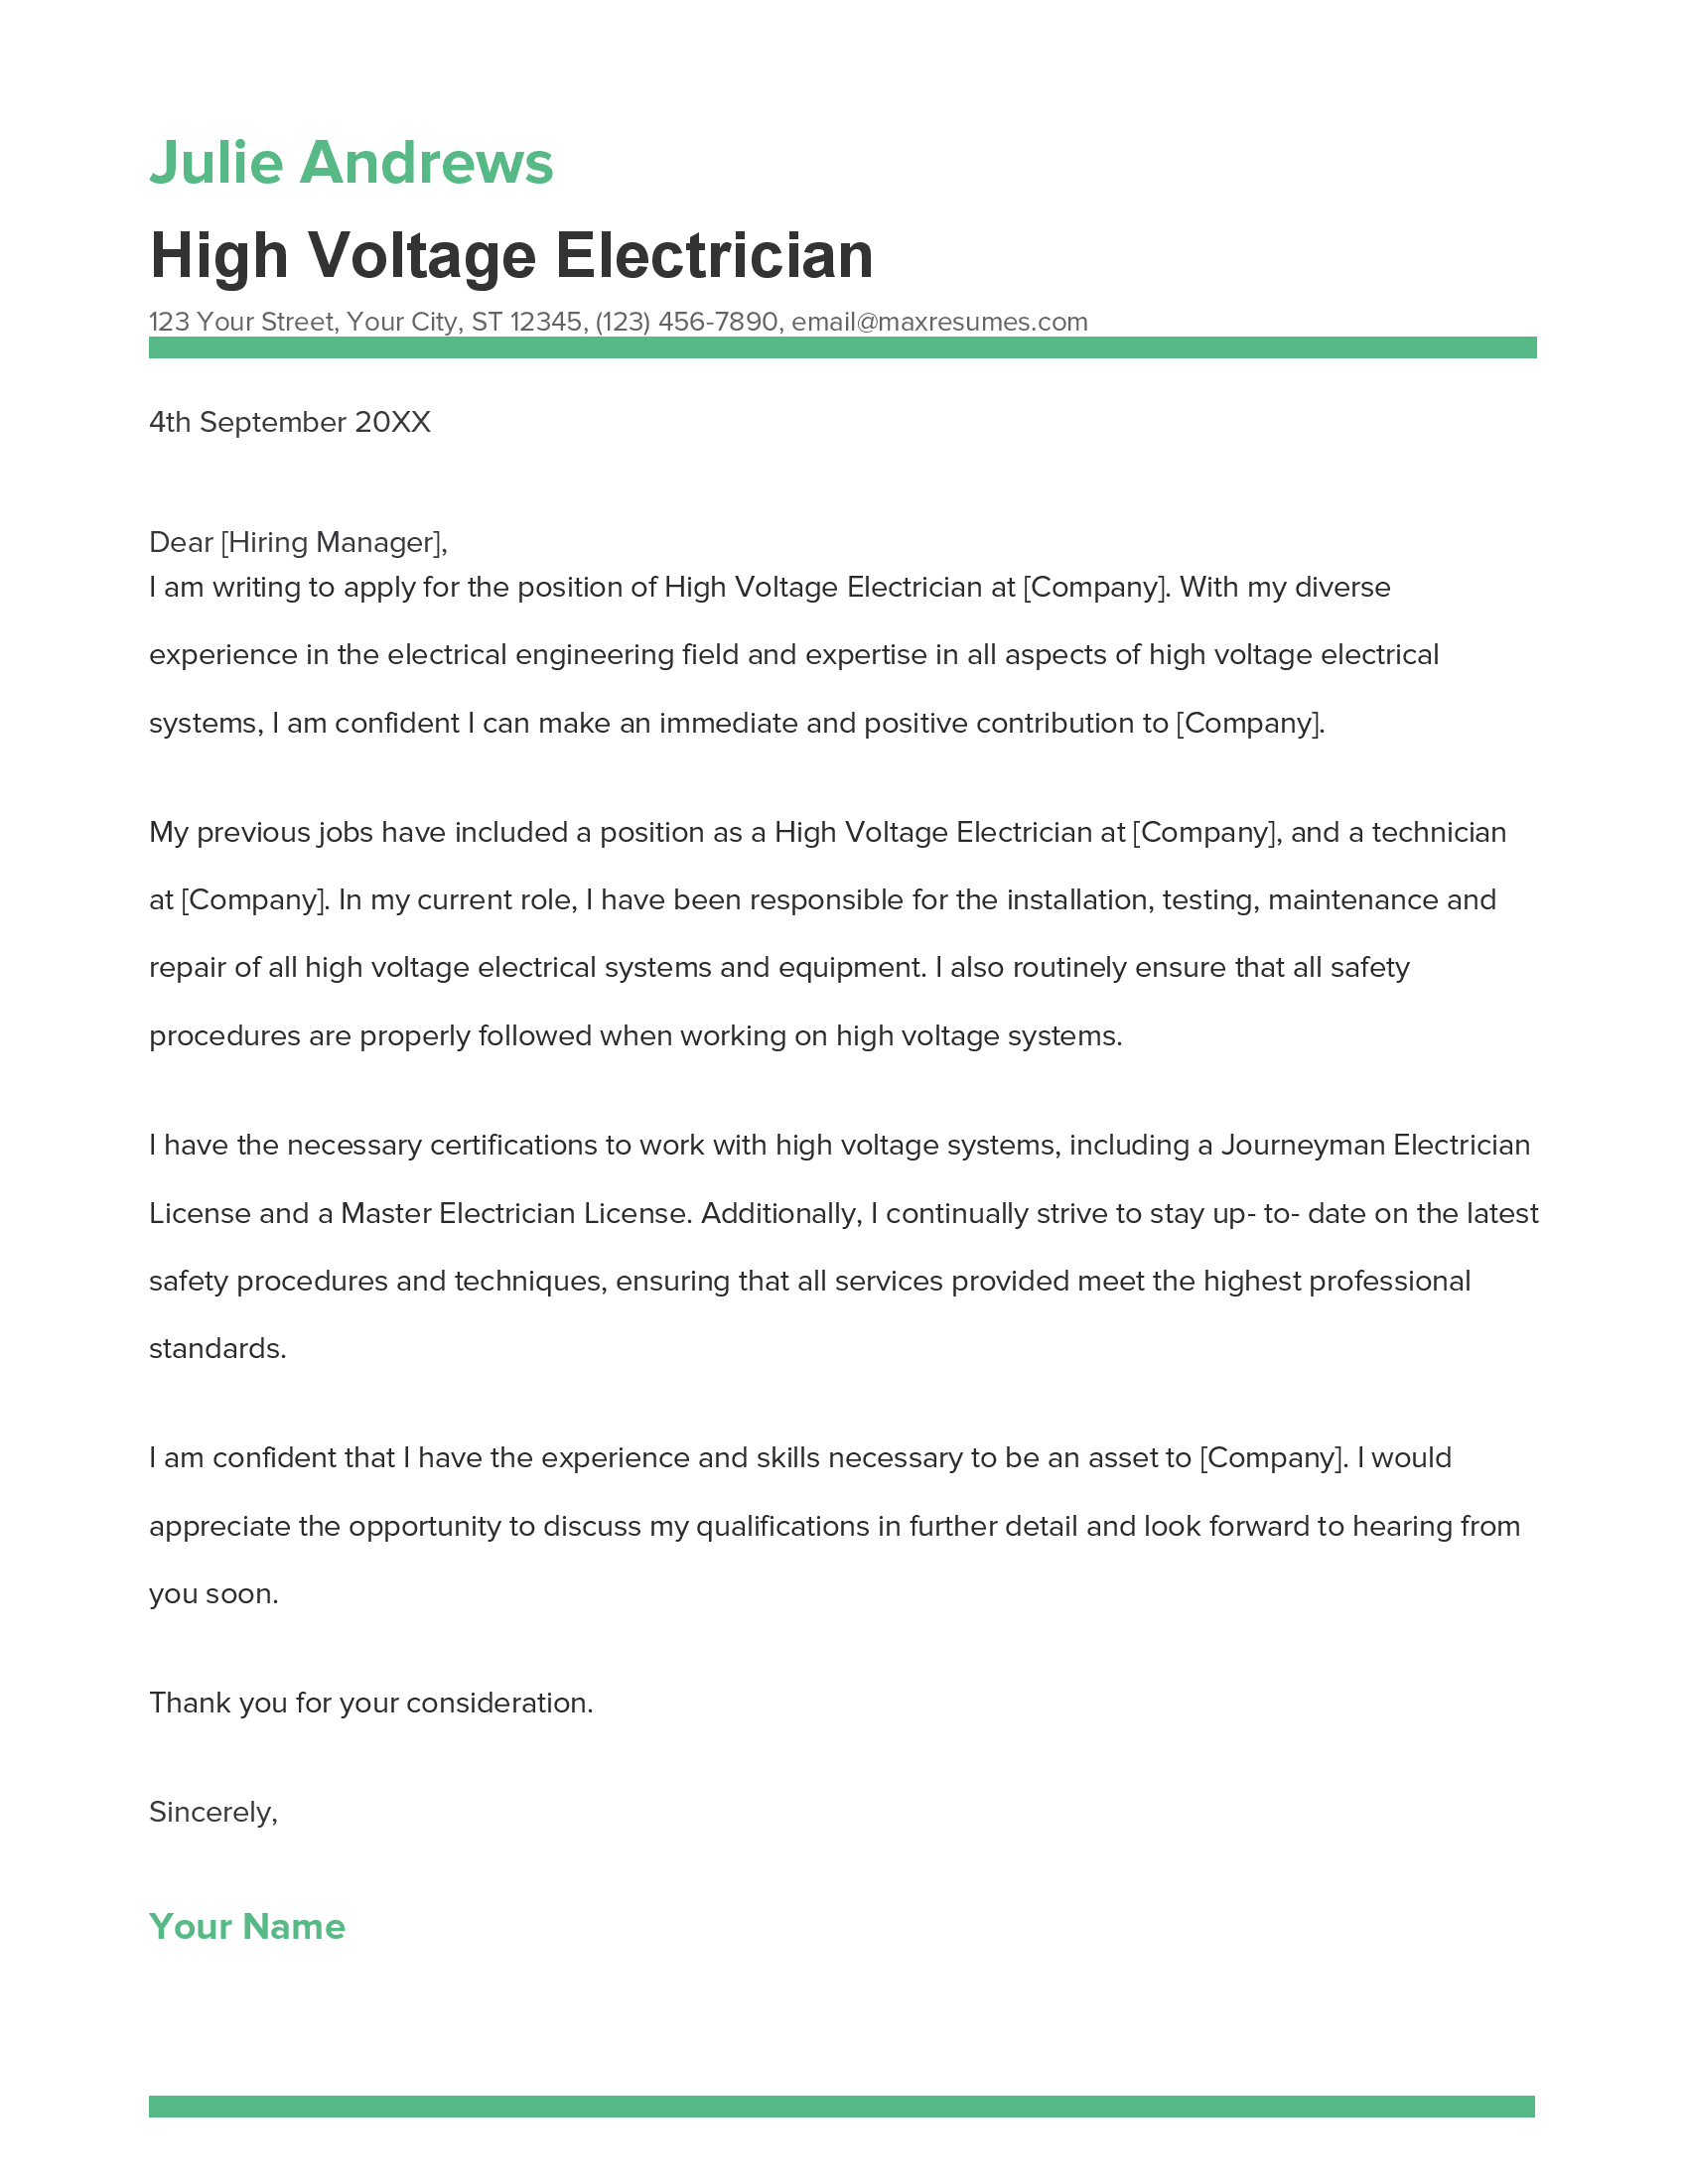 High Voltage Electrician Cover Letter Example